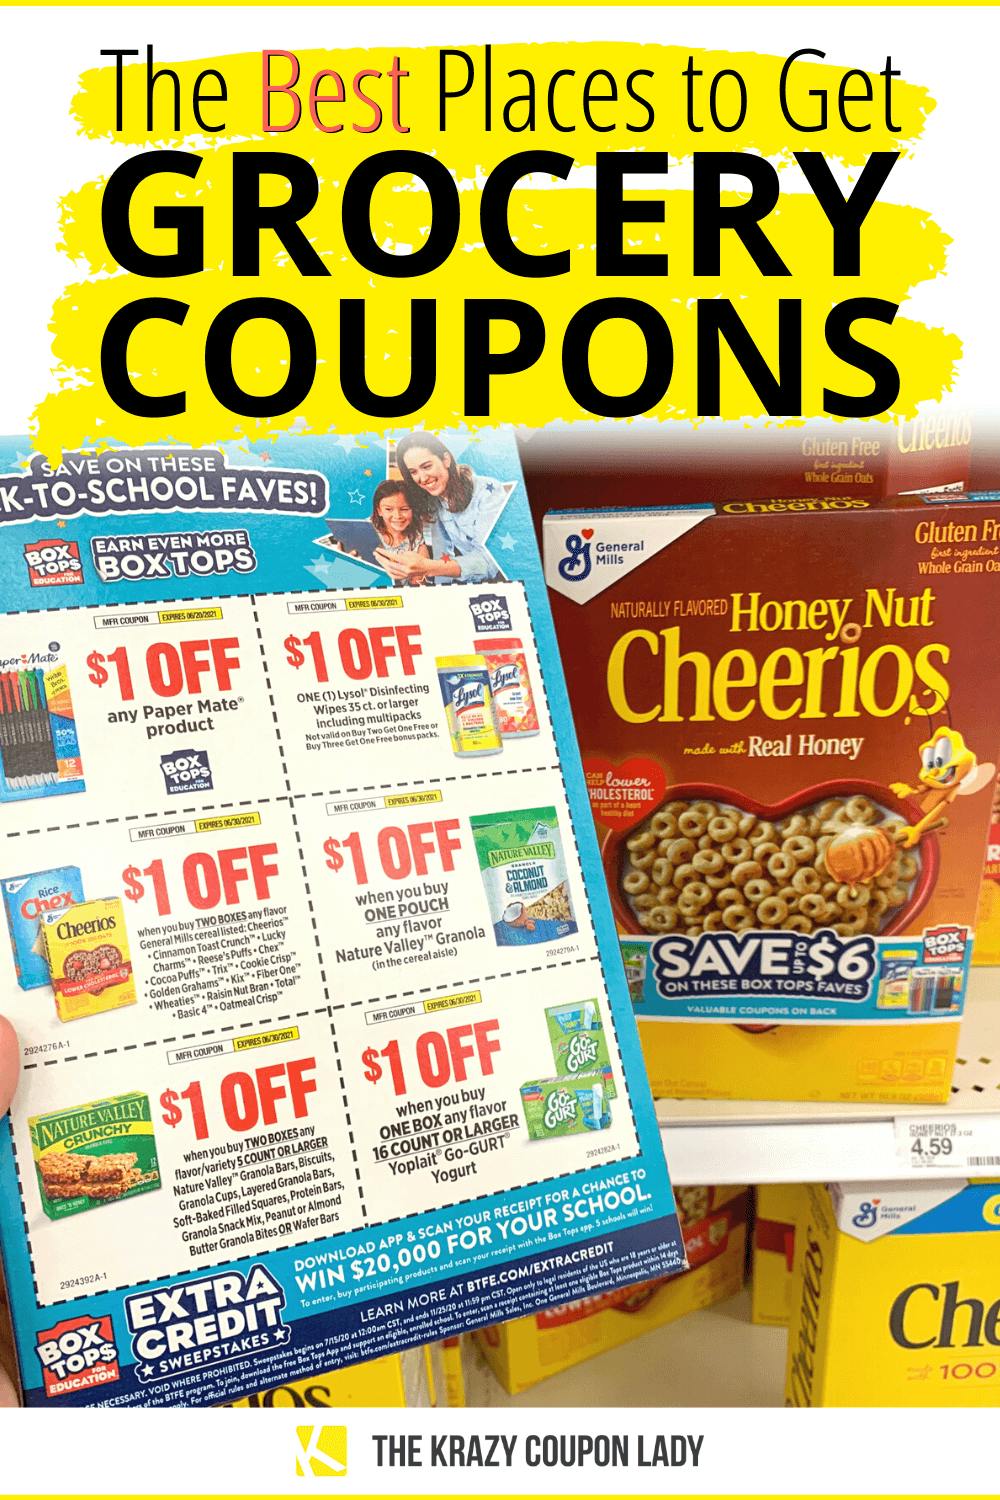 Got Grocery Coupons Look In These 32 Places For The Best Ones The 